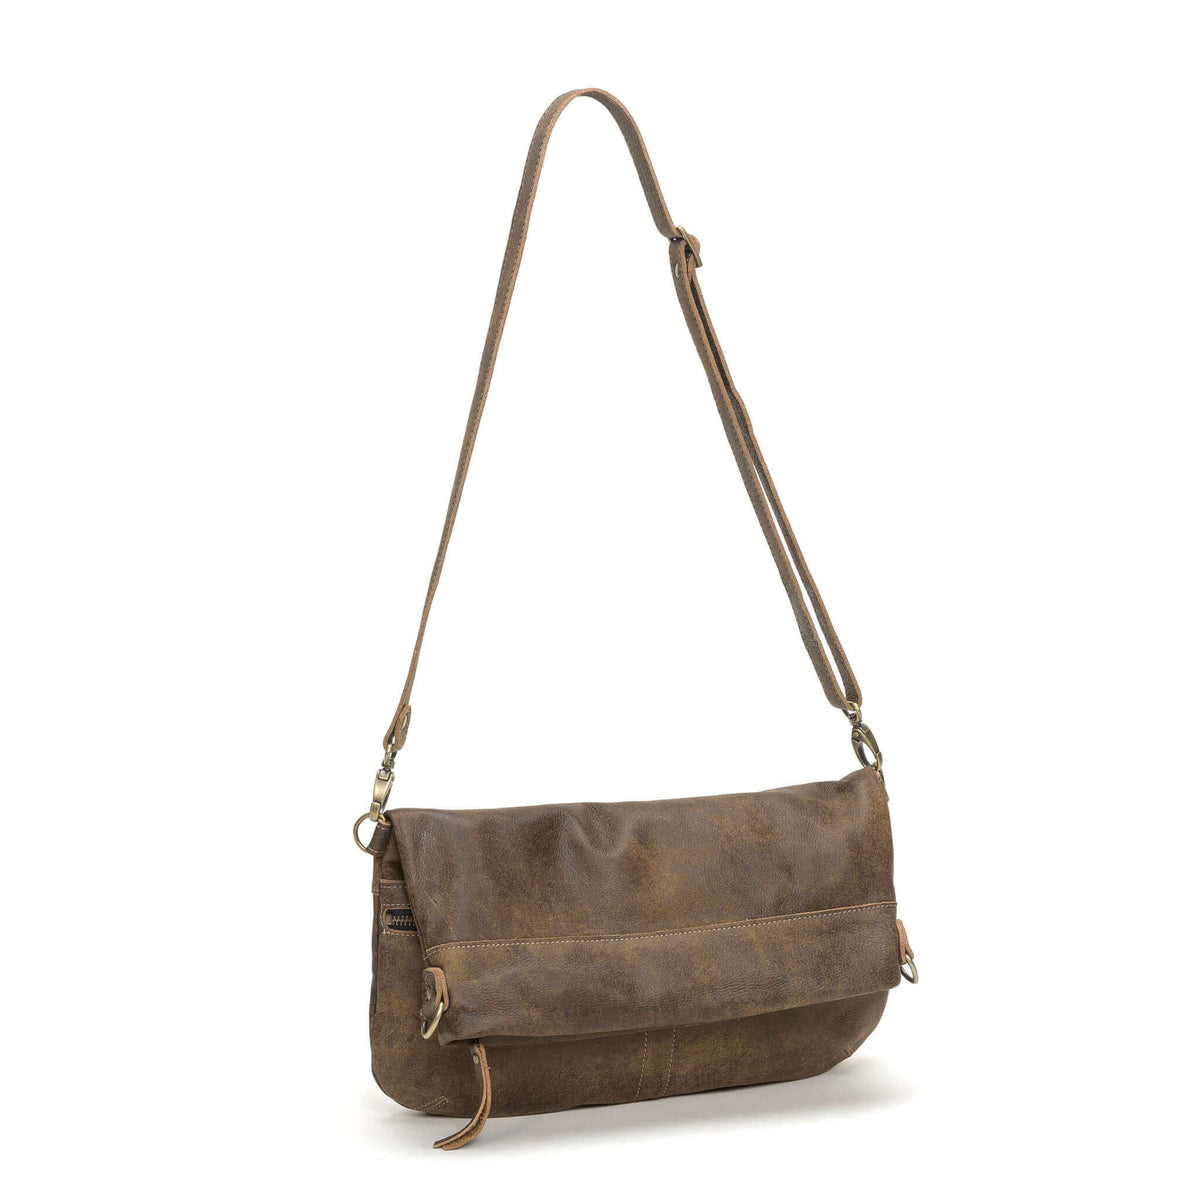 Convertible Crossbody Backpack - Brown full-grain leather - Brynn Capella, made in the USA